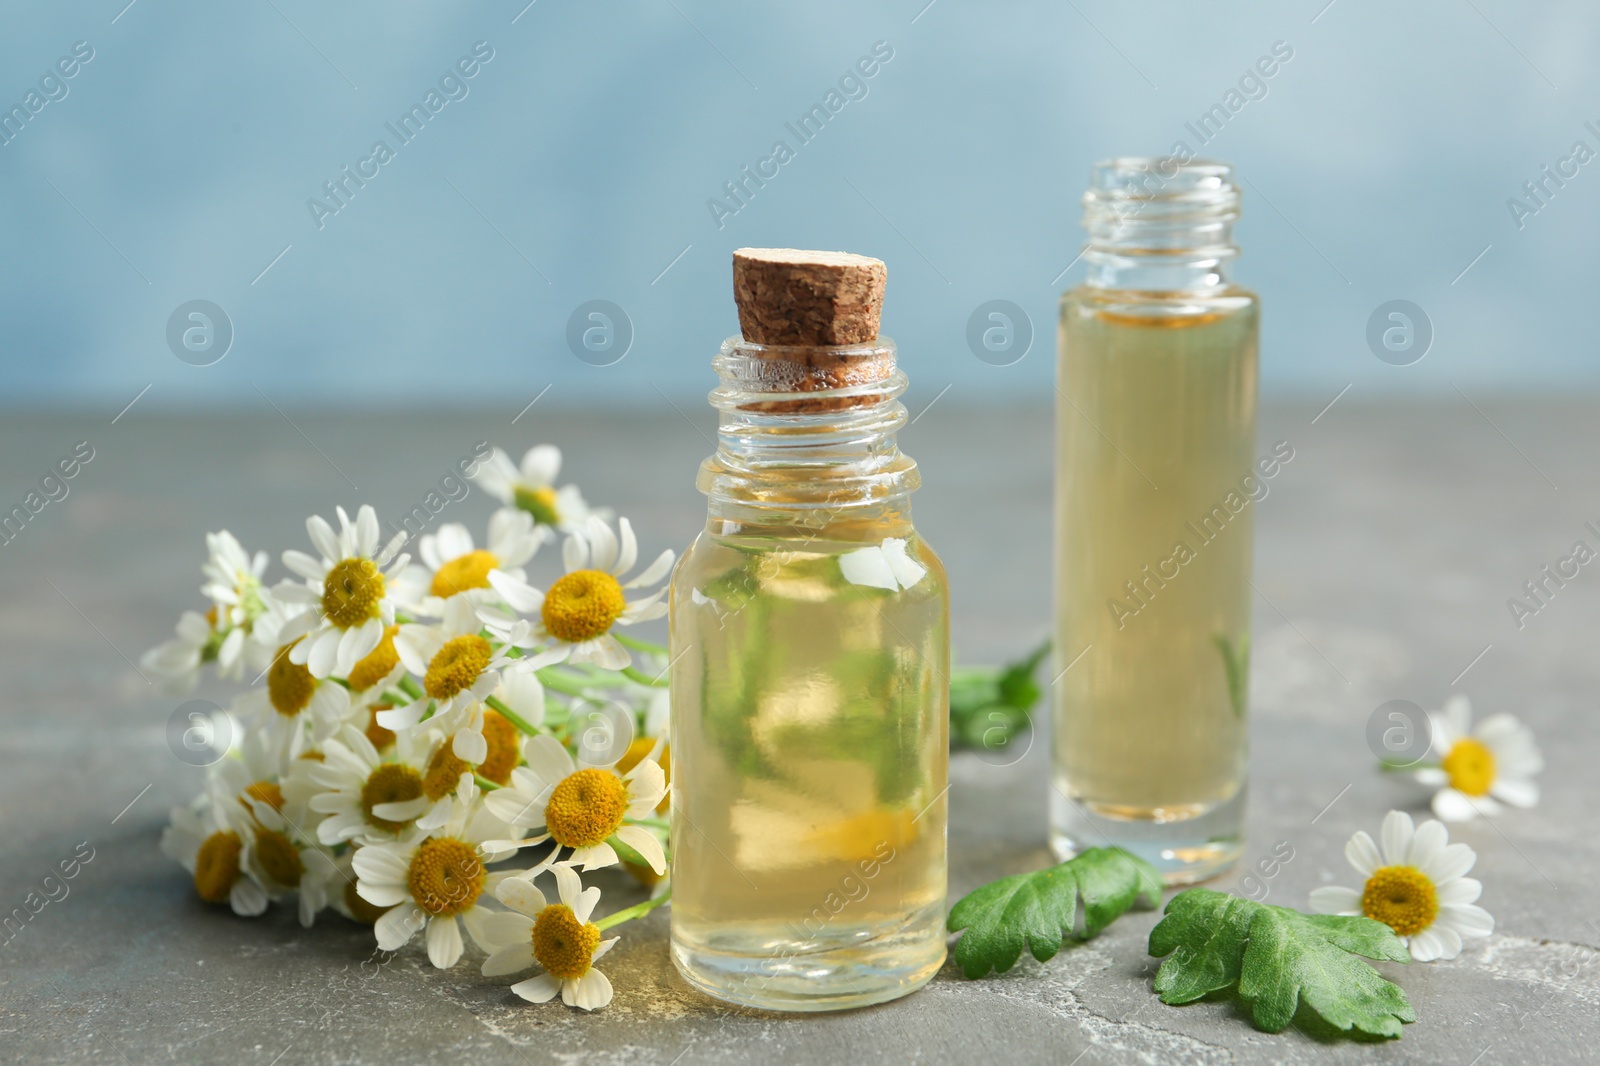 Photo of Bottles of essential oil and fresh chamomiles on grey stone table